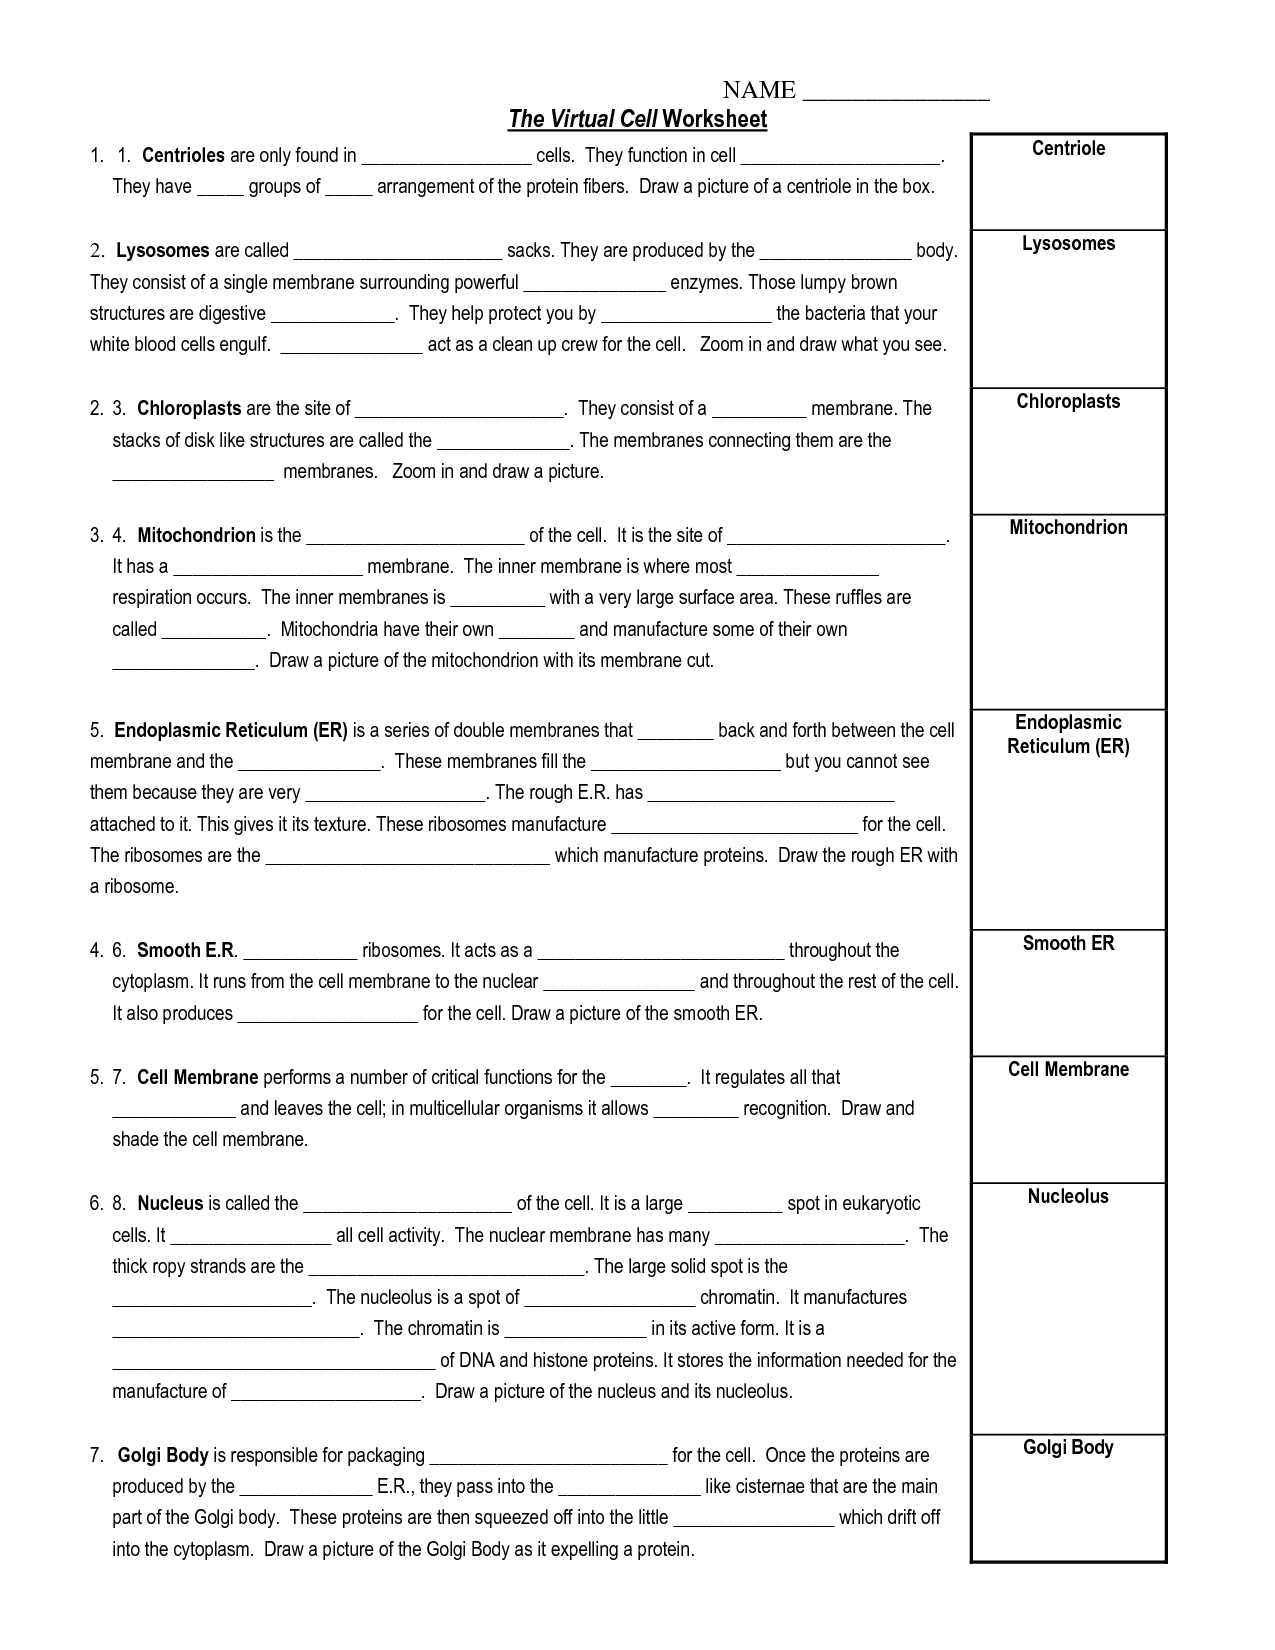 15 Best Images Of Blood Cells And Functions Worksheets Blood Cells Worksheet Virtual Cell 